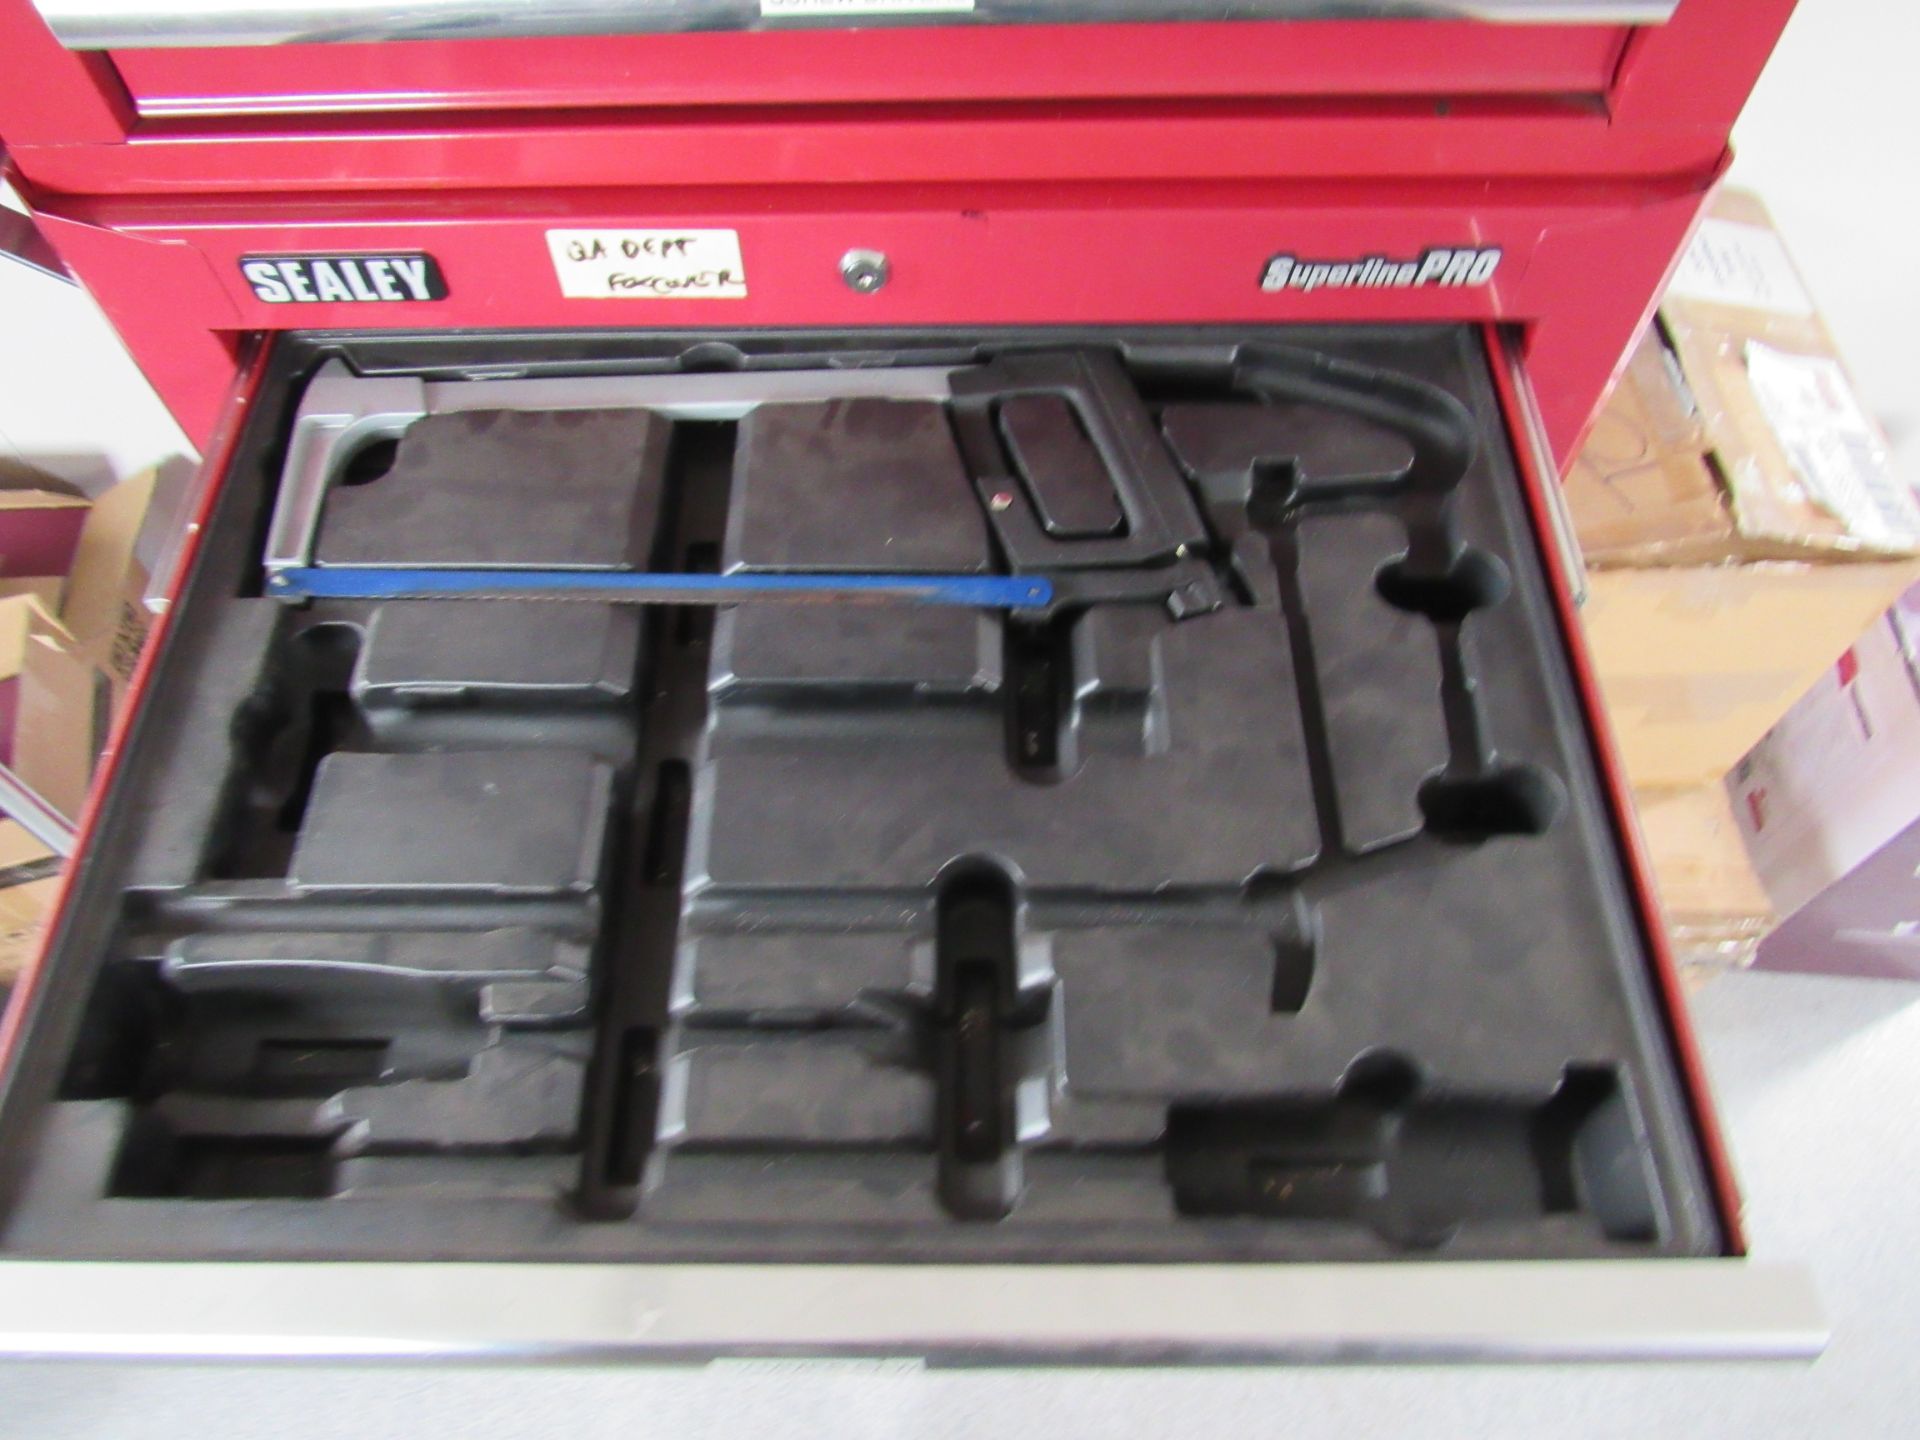 Sealey Superline Pro Tool Chest including Various - Image 8 of 10